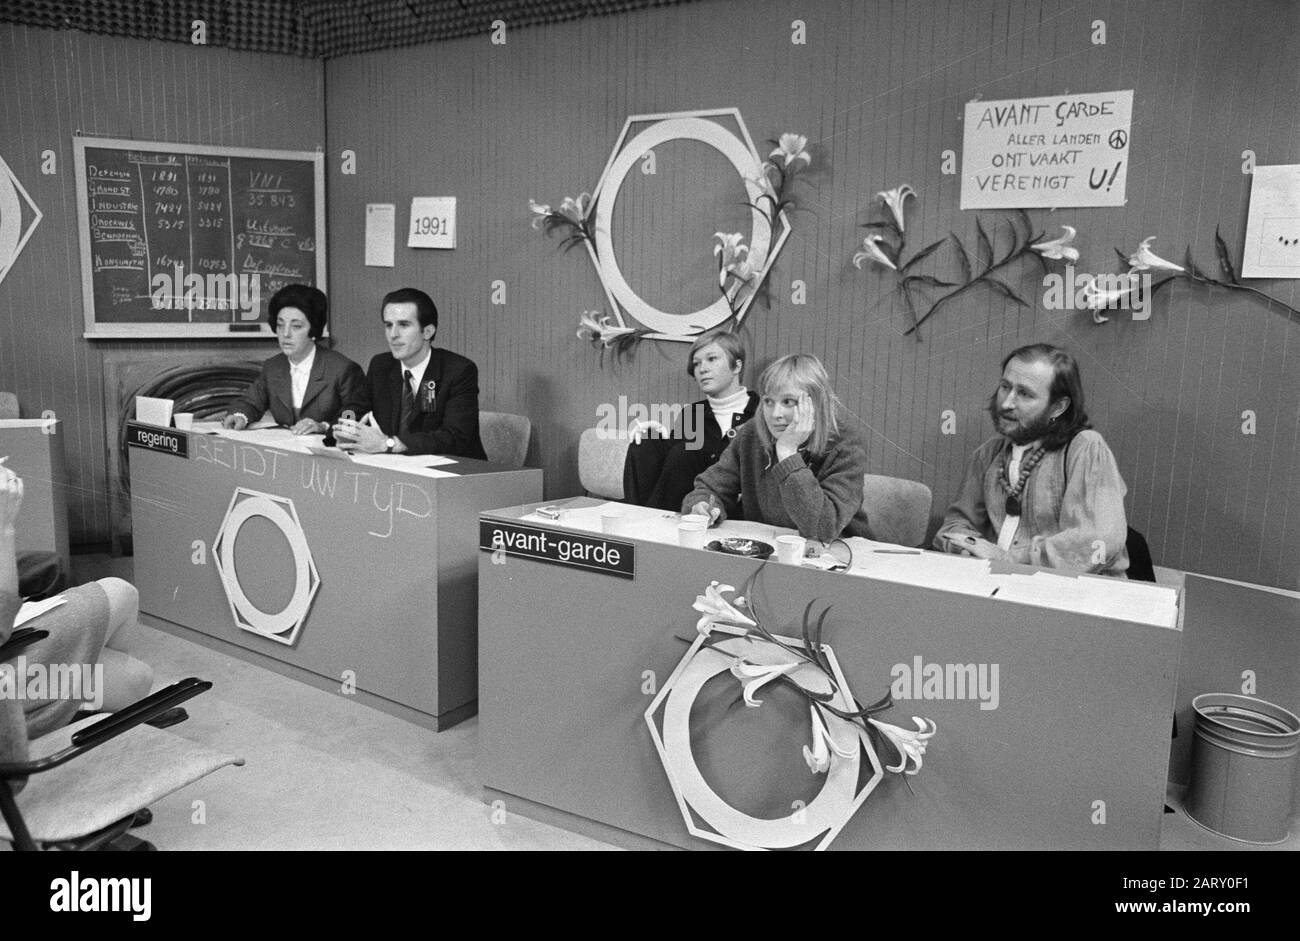 TV game of 4 hours, No World, Yes World. Government and avant-garde of the fictitious Eastern bloc country Oritle. Right Ernst Fijlbrief Date: October 15, 1969 Keywords: TV Games Personal name: File letter, Ernst Stock Photo